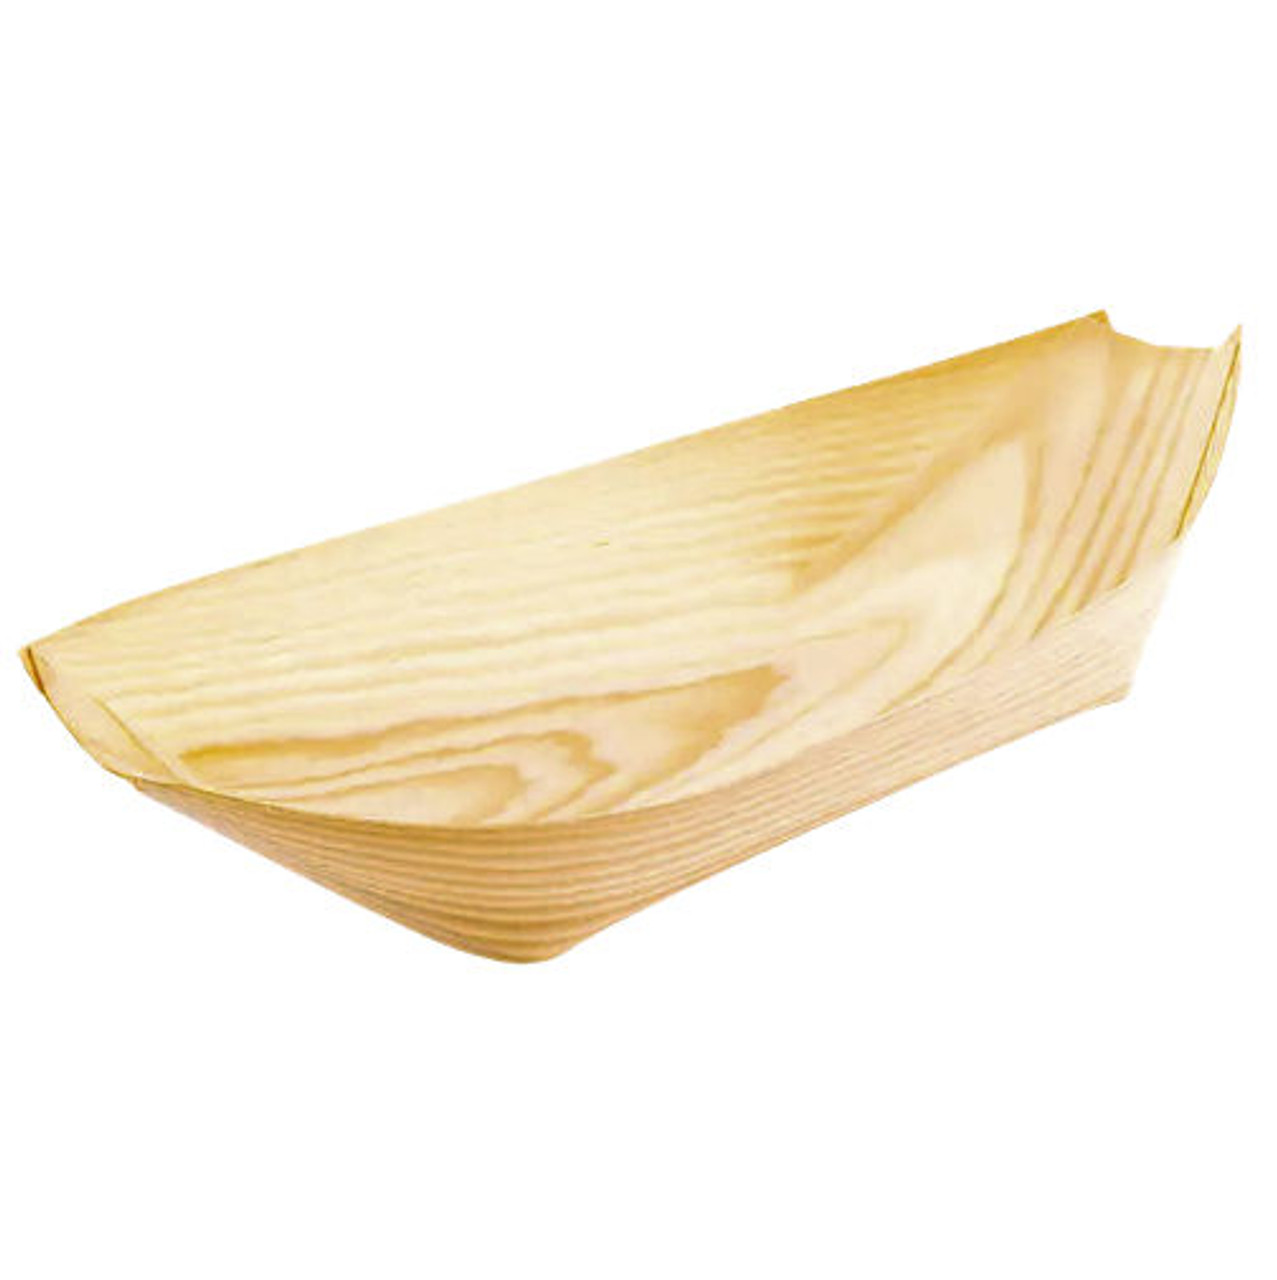 Natural Pinewood Large 190 x 105 x 40mm Canape Boats Pack of 50